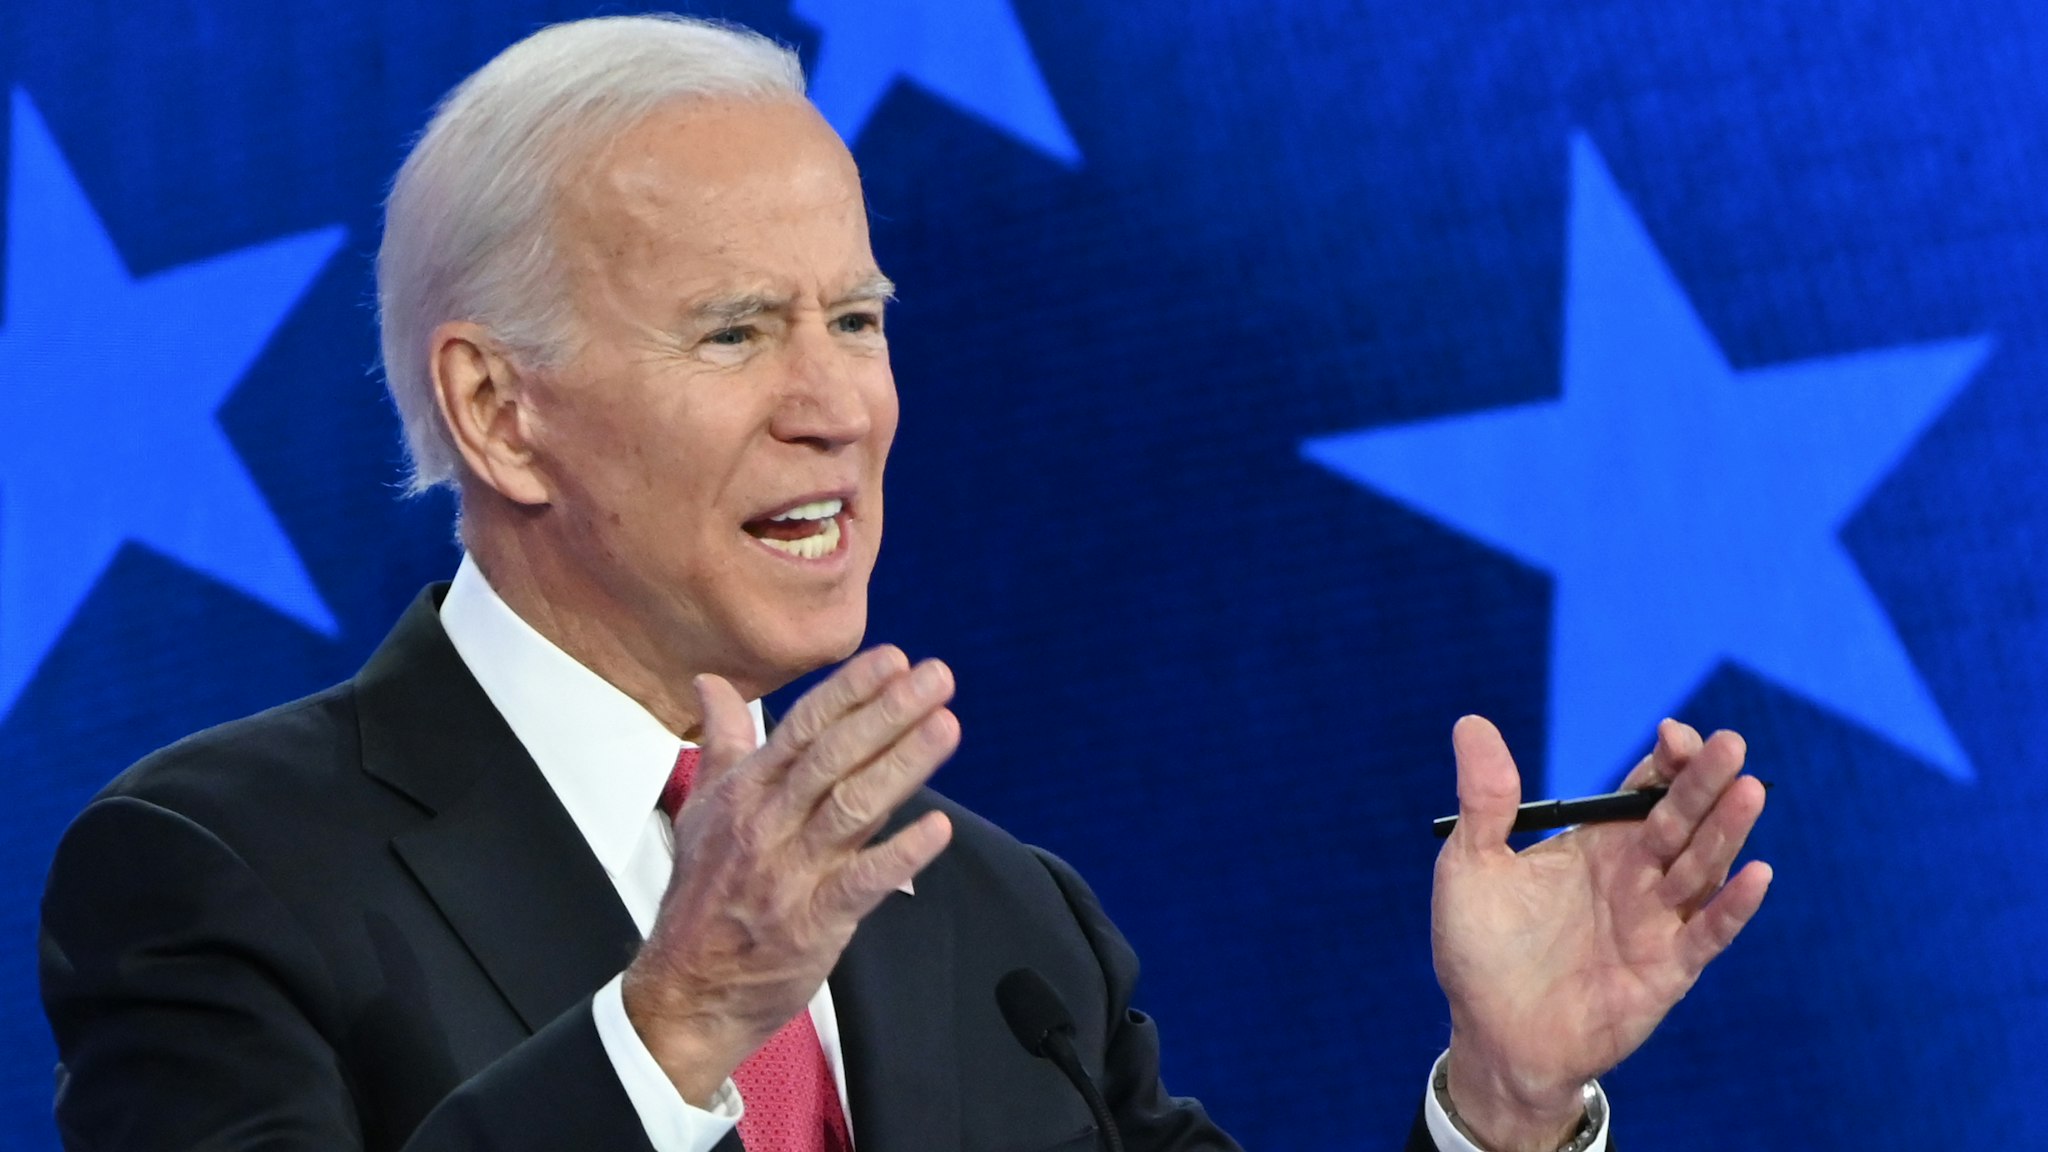 Democratic presidential hopeful Former Vice President Joe Biden speaks during the fifth Democratic primary debate of the 2020 presidential campaign season co-hosted by MSNBC and The Washington Post at Tyler Perry Studios in Atlanta, Georgia on November 20, 2019.